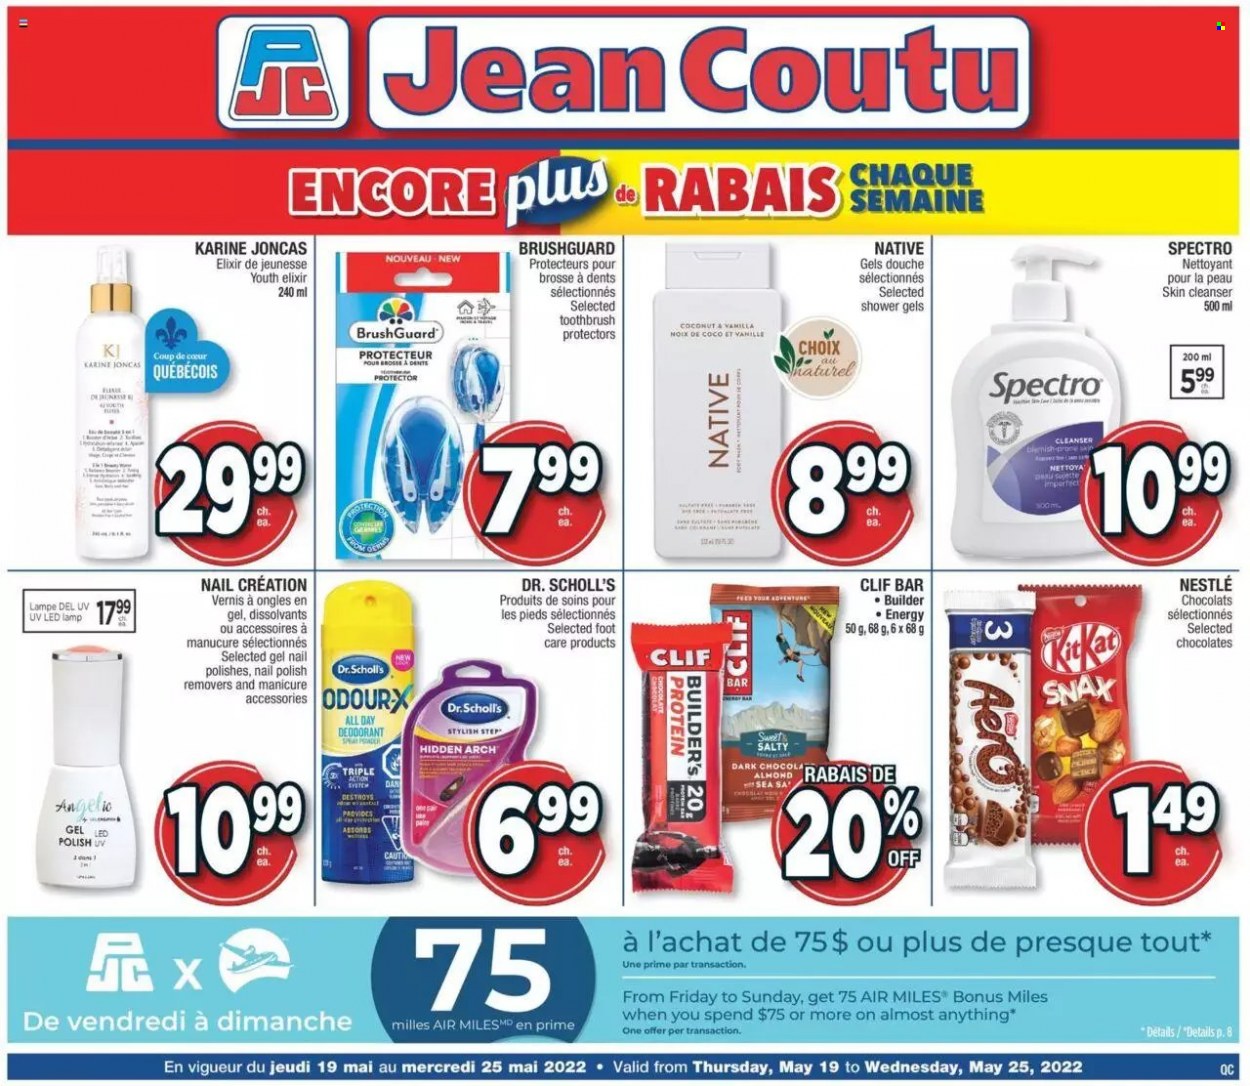 thumbnail - Jean Coutu Flyer - May 19, 2022 - May 25, 2022 - Sales products - chocolate, toothbrush, cleanser, manicure, polish, foot care, Dr. Scholl's, Nestlé. Page 1.